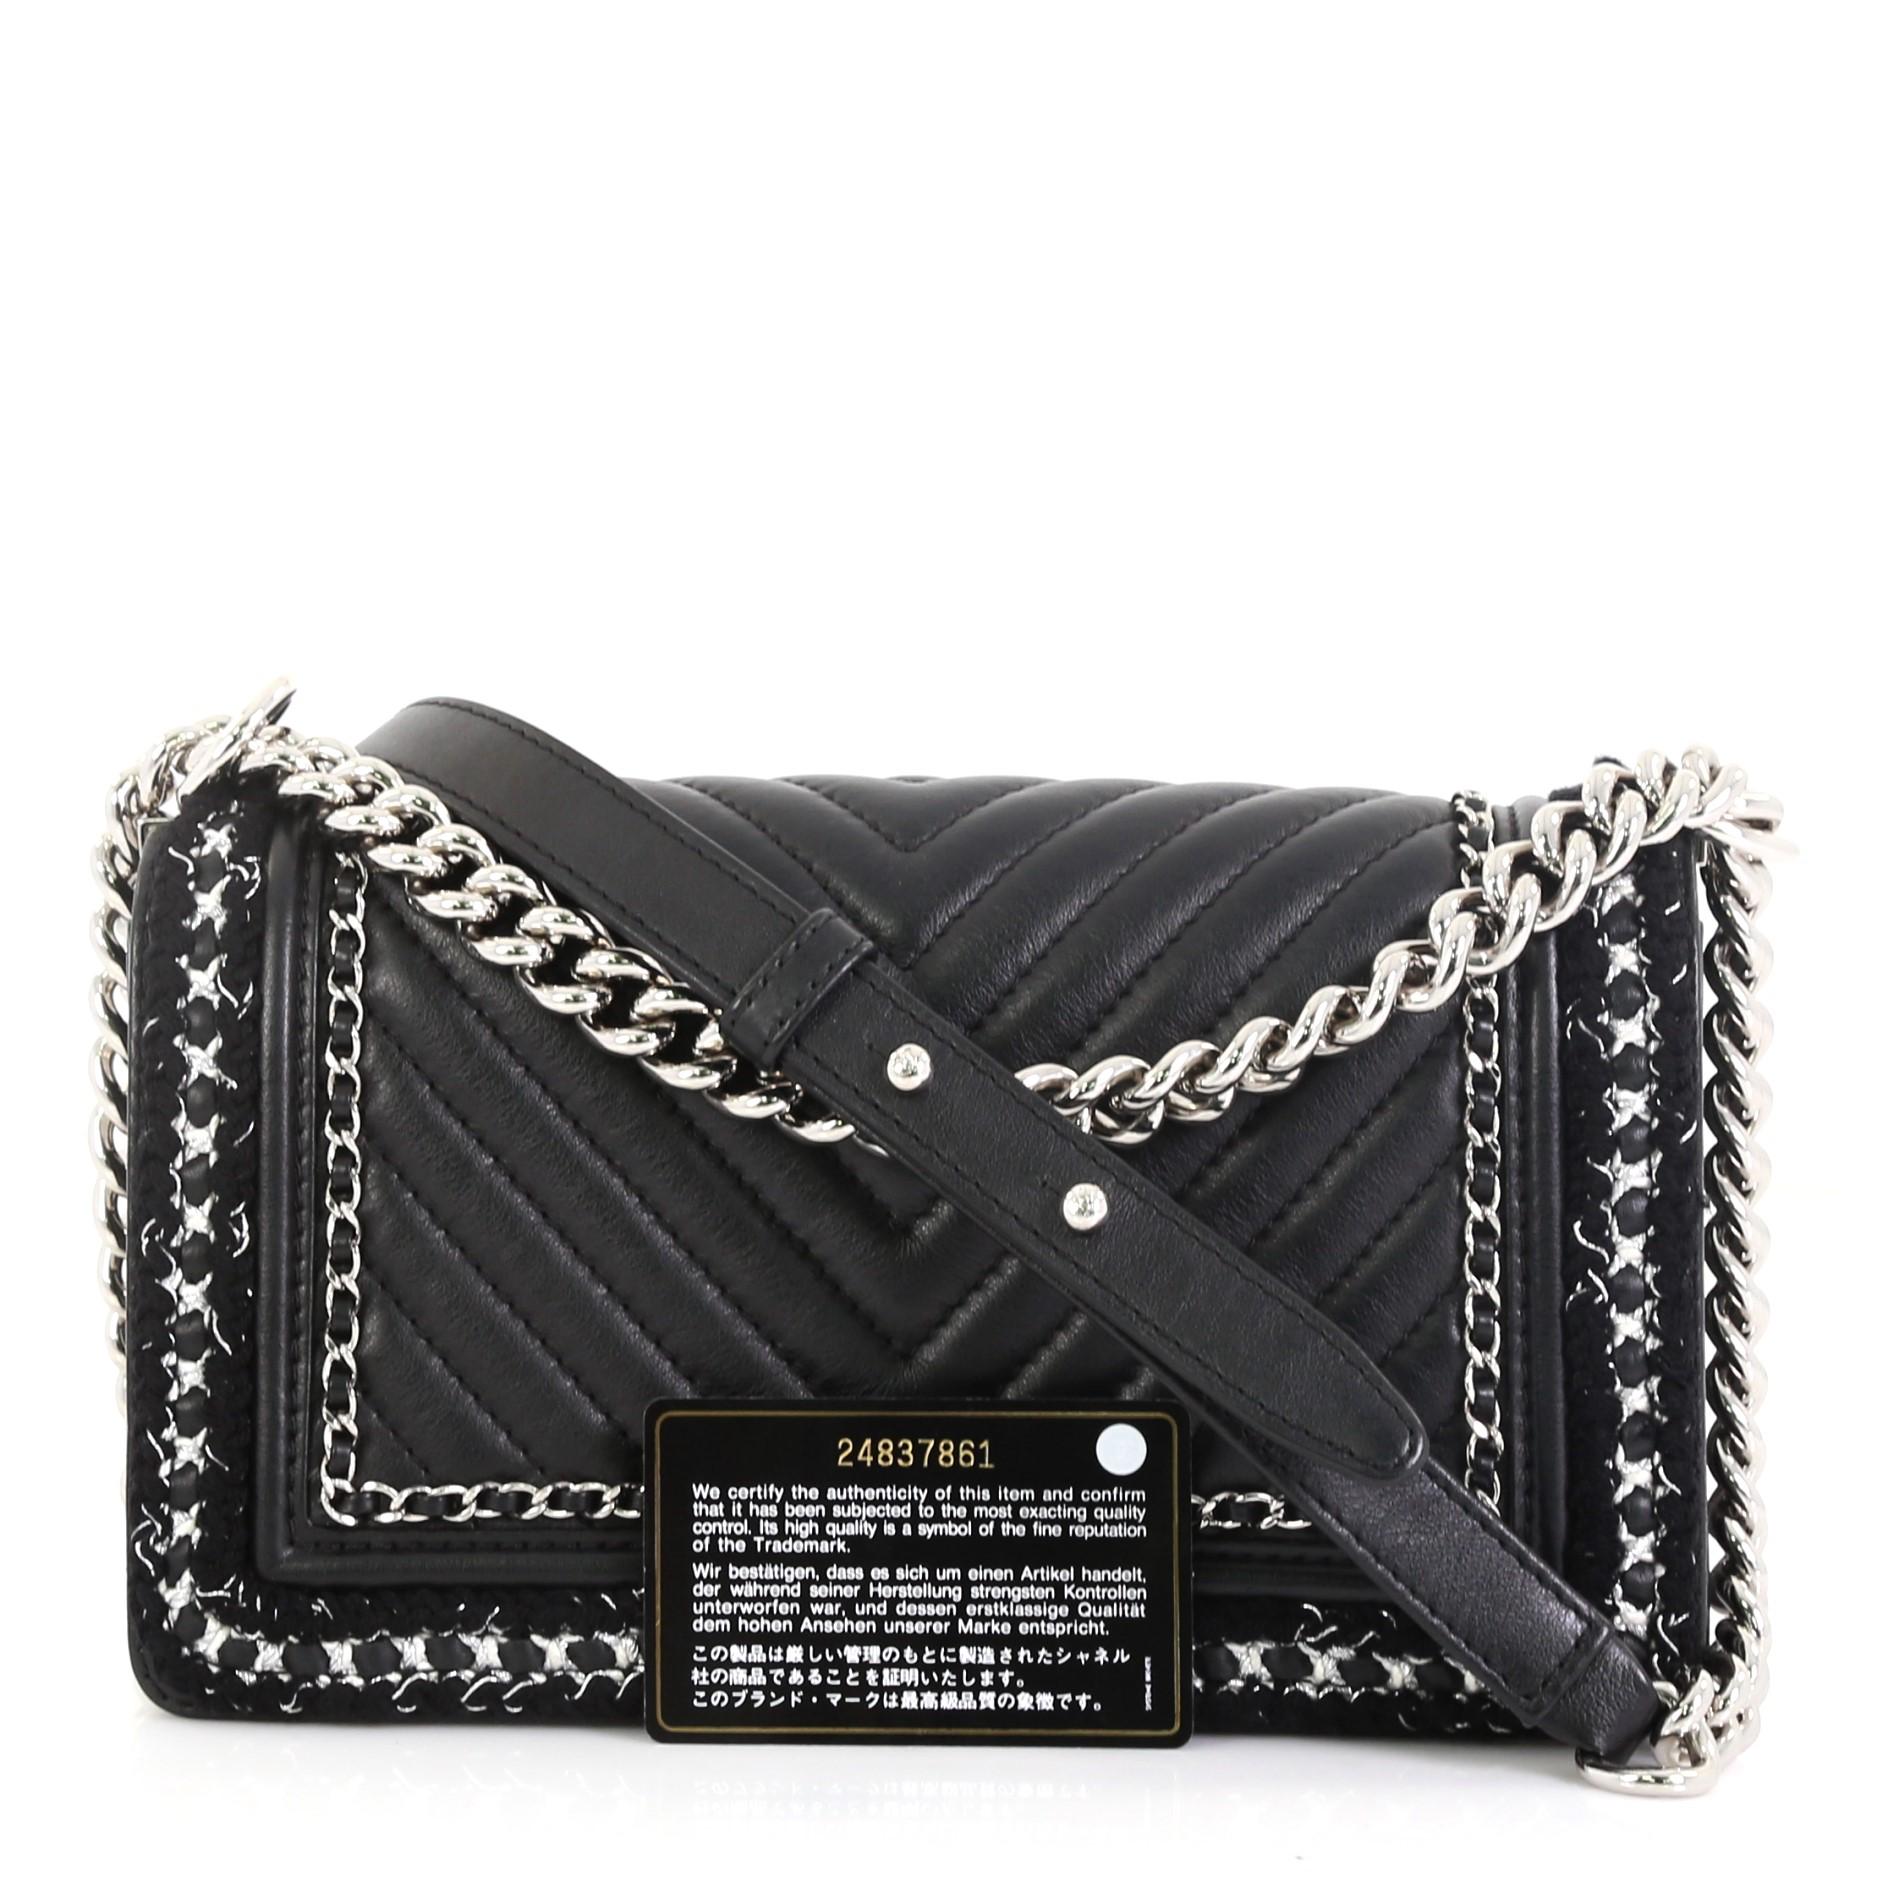 This Chanel Jacket Boy Flap Bag Chevron Calfskin with Tweed Old Medium, crafted in black chevron leather, features chain link strap with leather pad and silver-tone hardware. Its Boy push-lock closure opens to a black fabric interior with slip